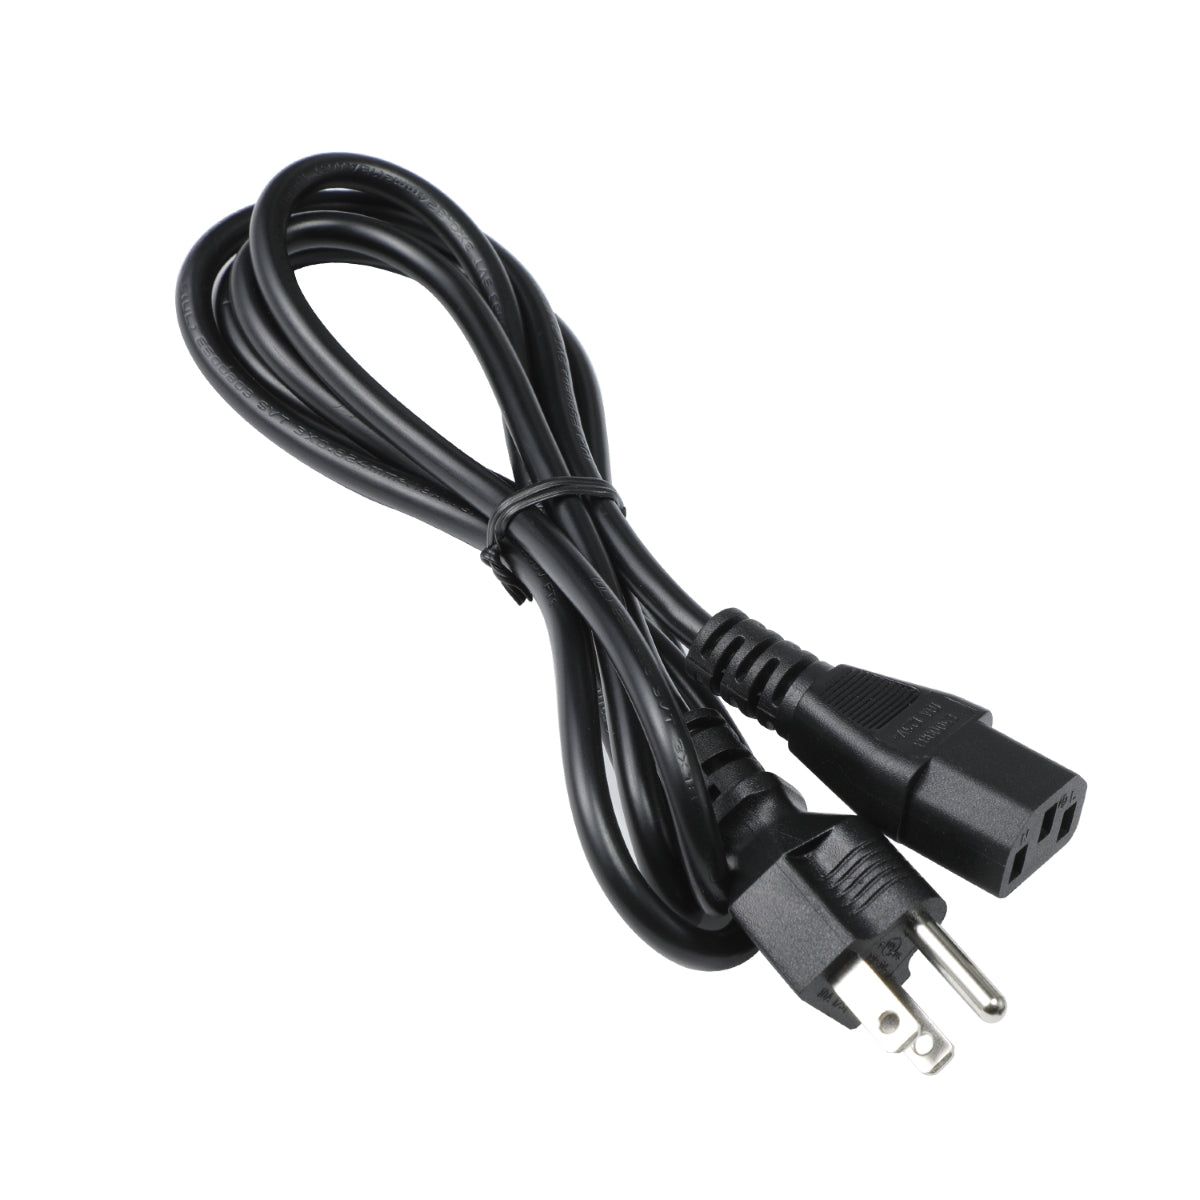 Power Cord for ViewSonic VG3456 Monitor